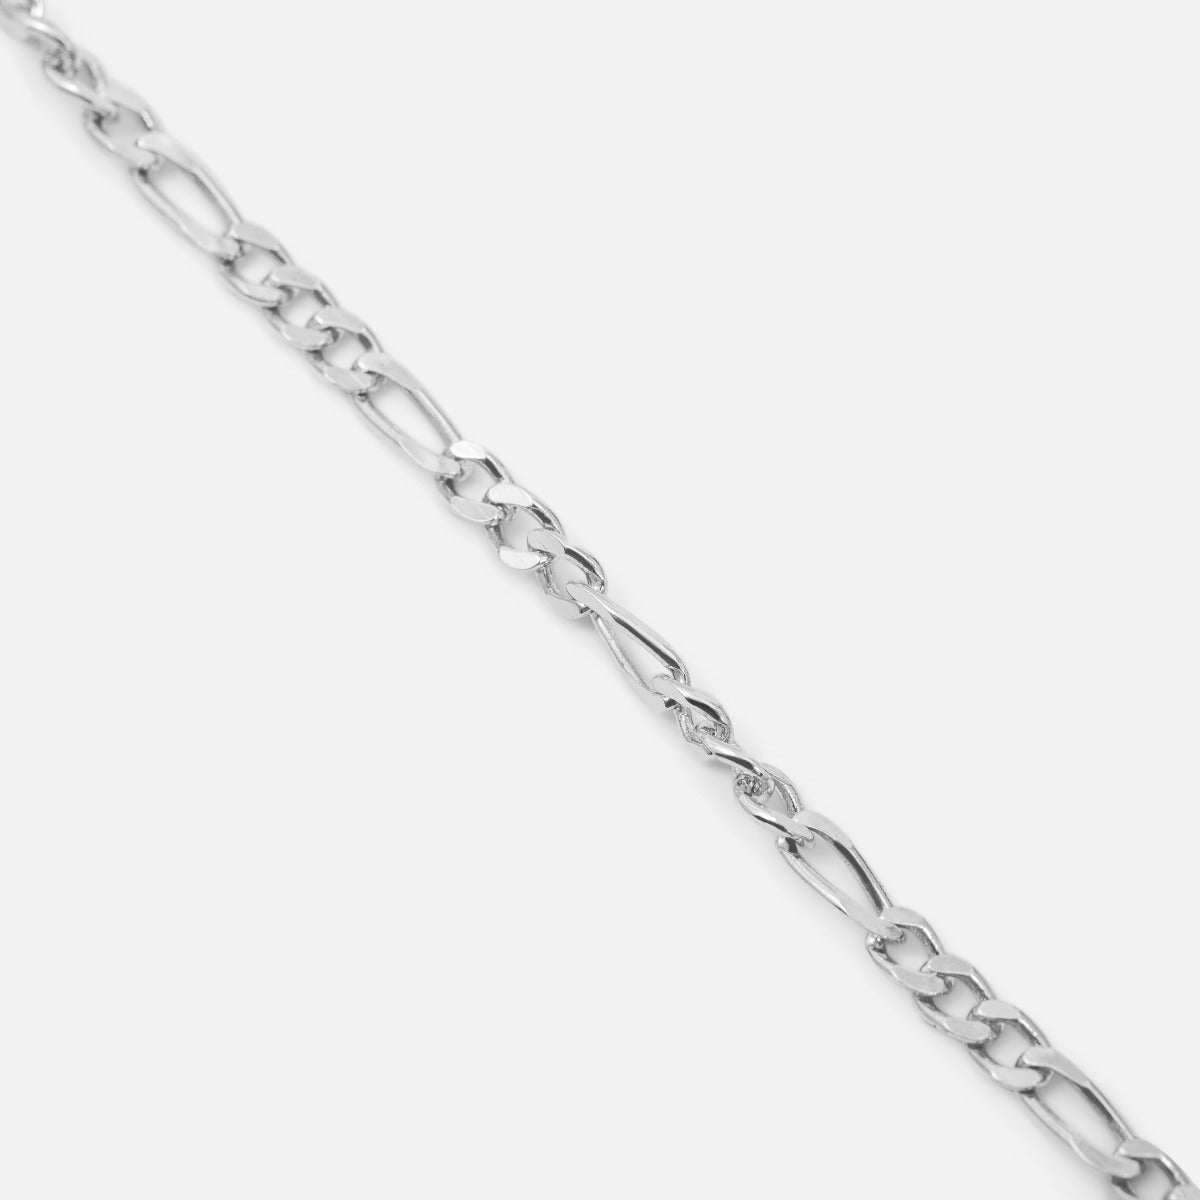 Silvered bracelet chain with figaro mesh 7.5 inches